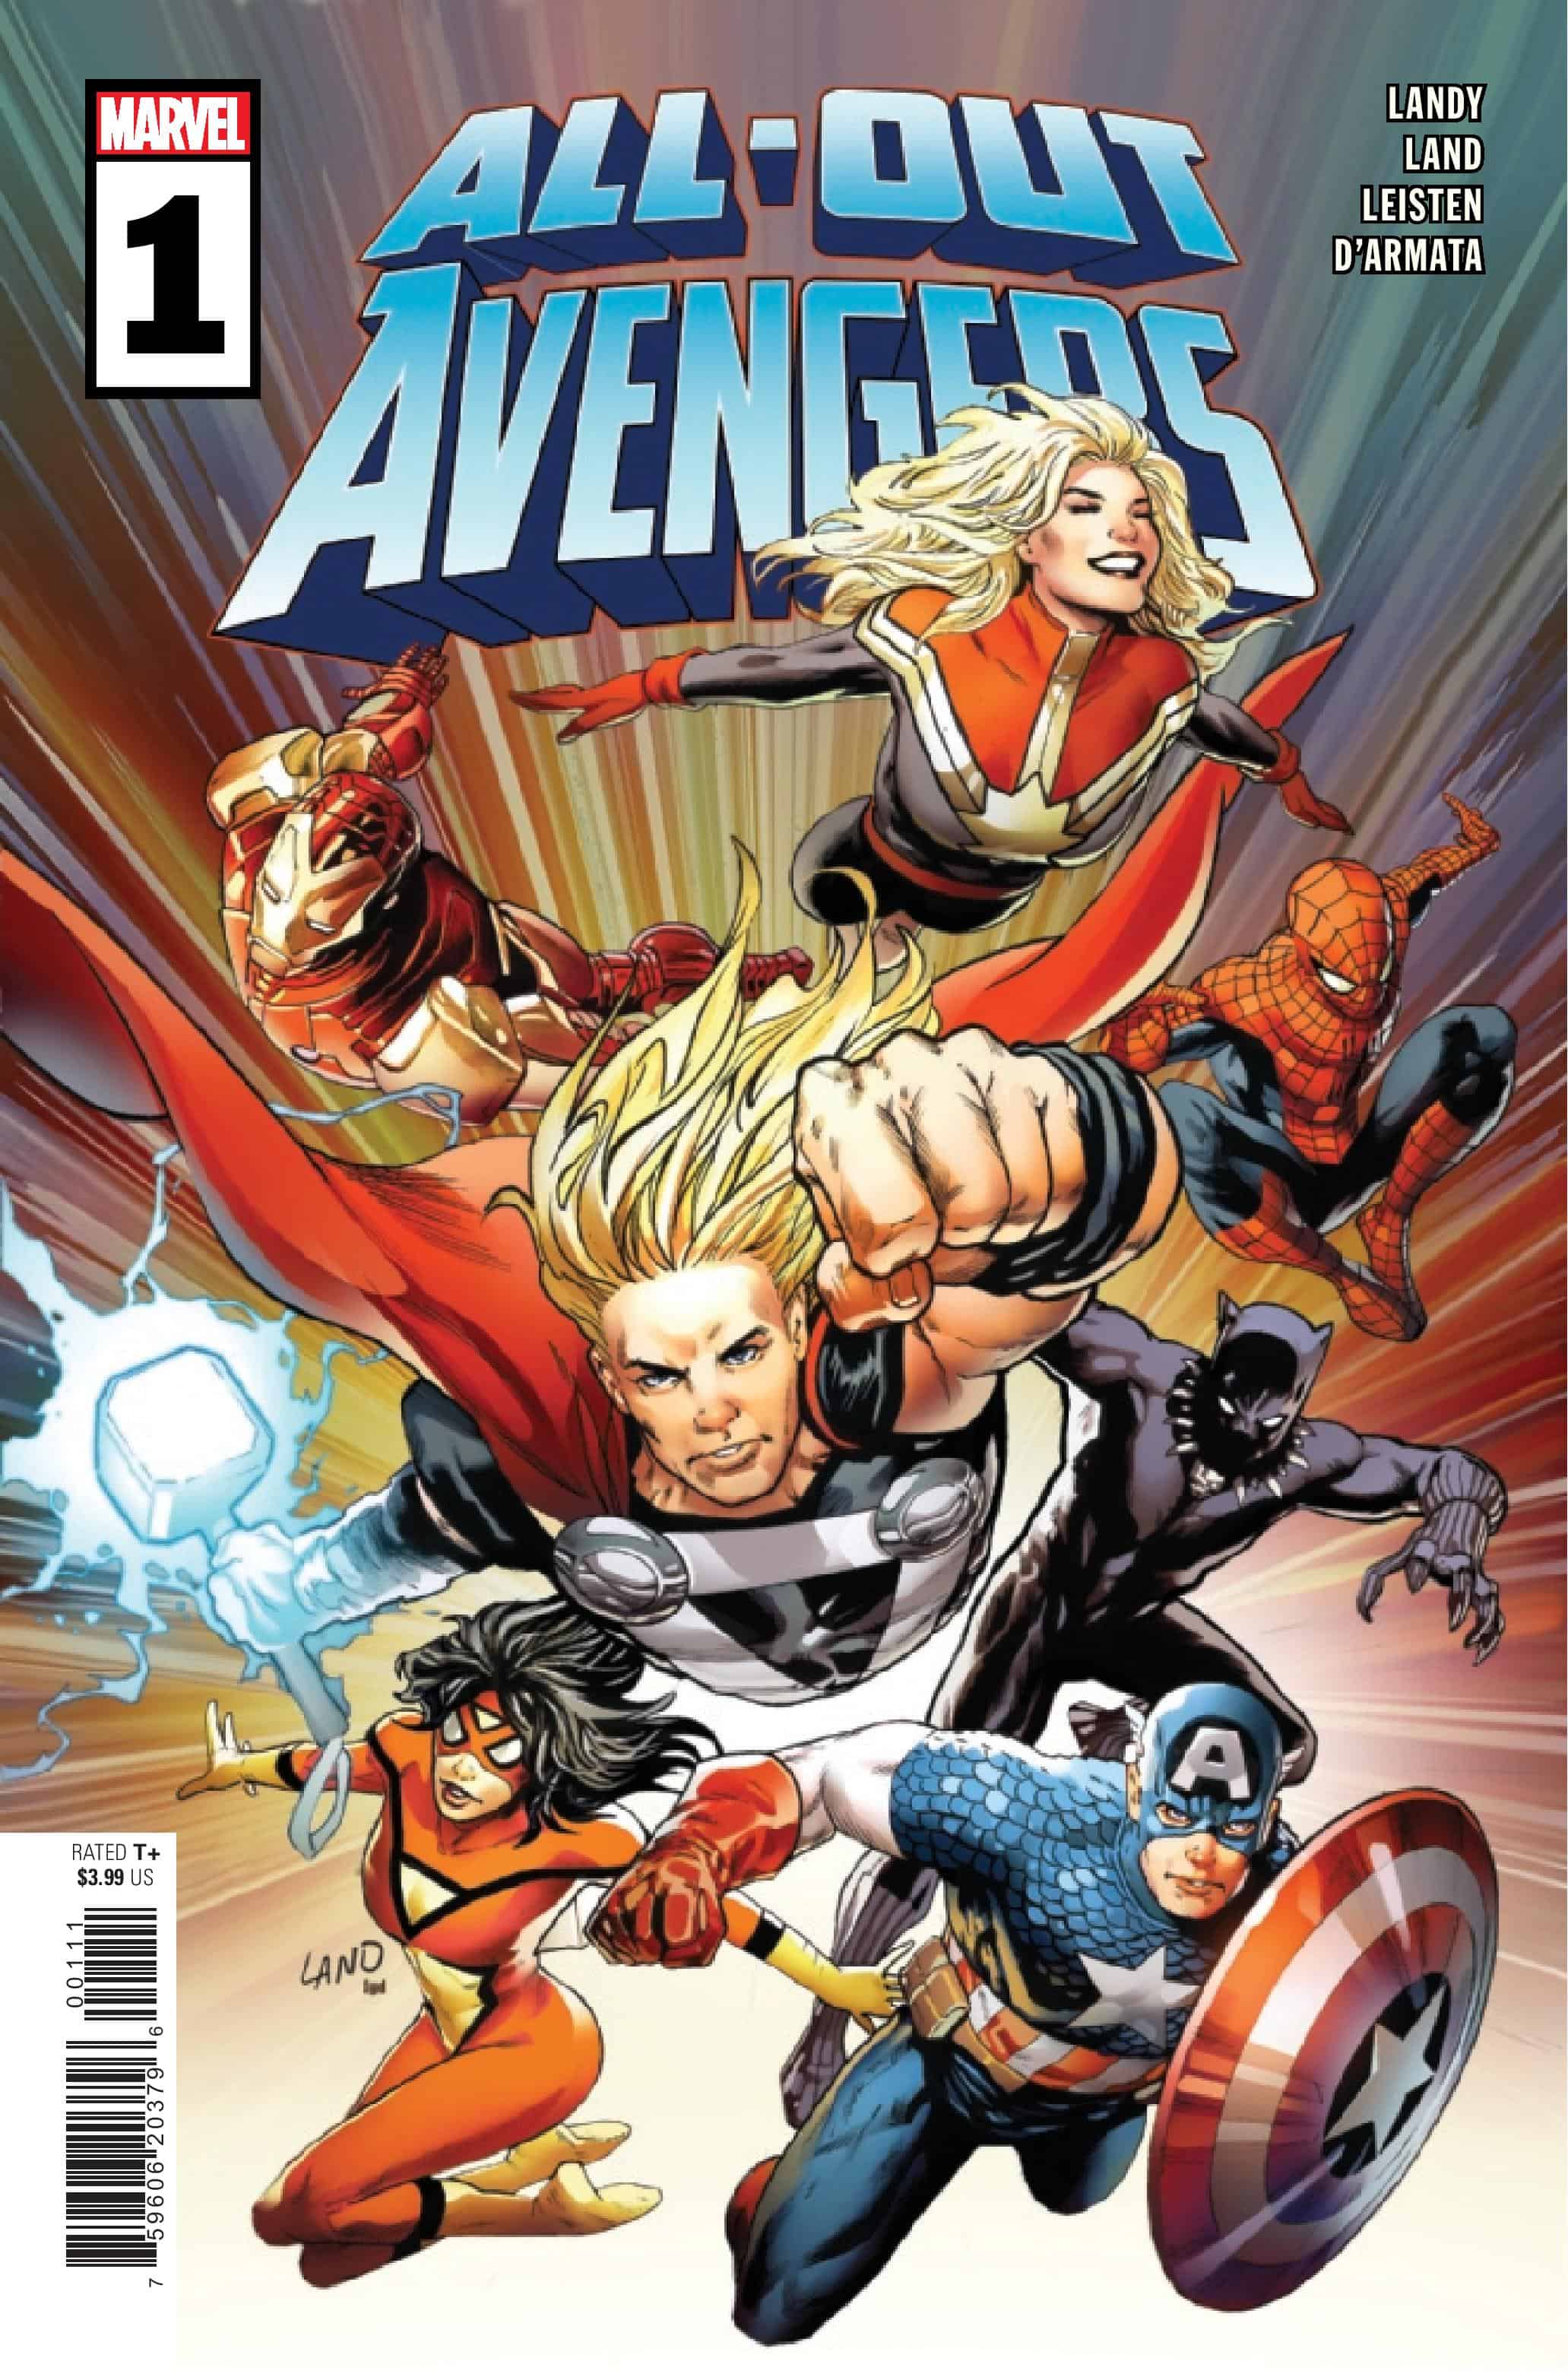 All-Out Avengers #1: No End, and No Beginning… - Comic Watch